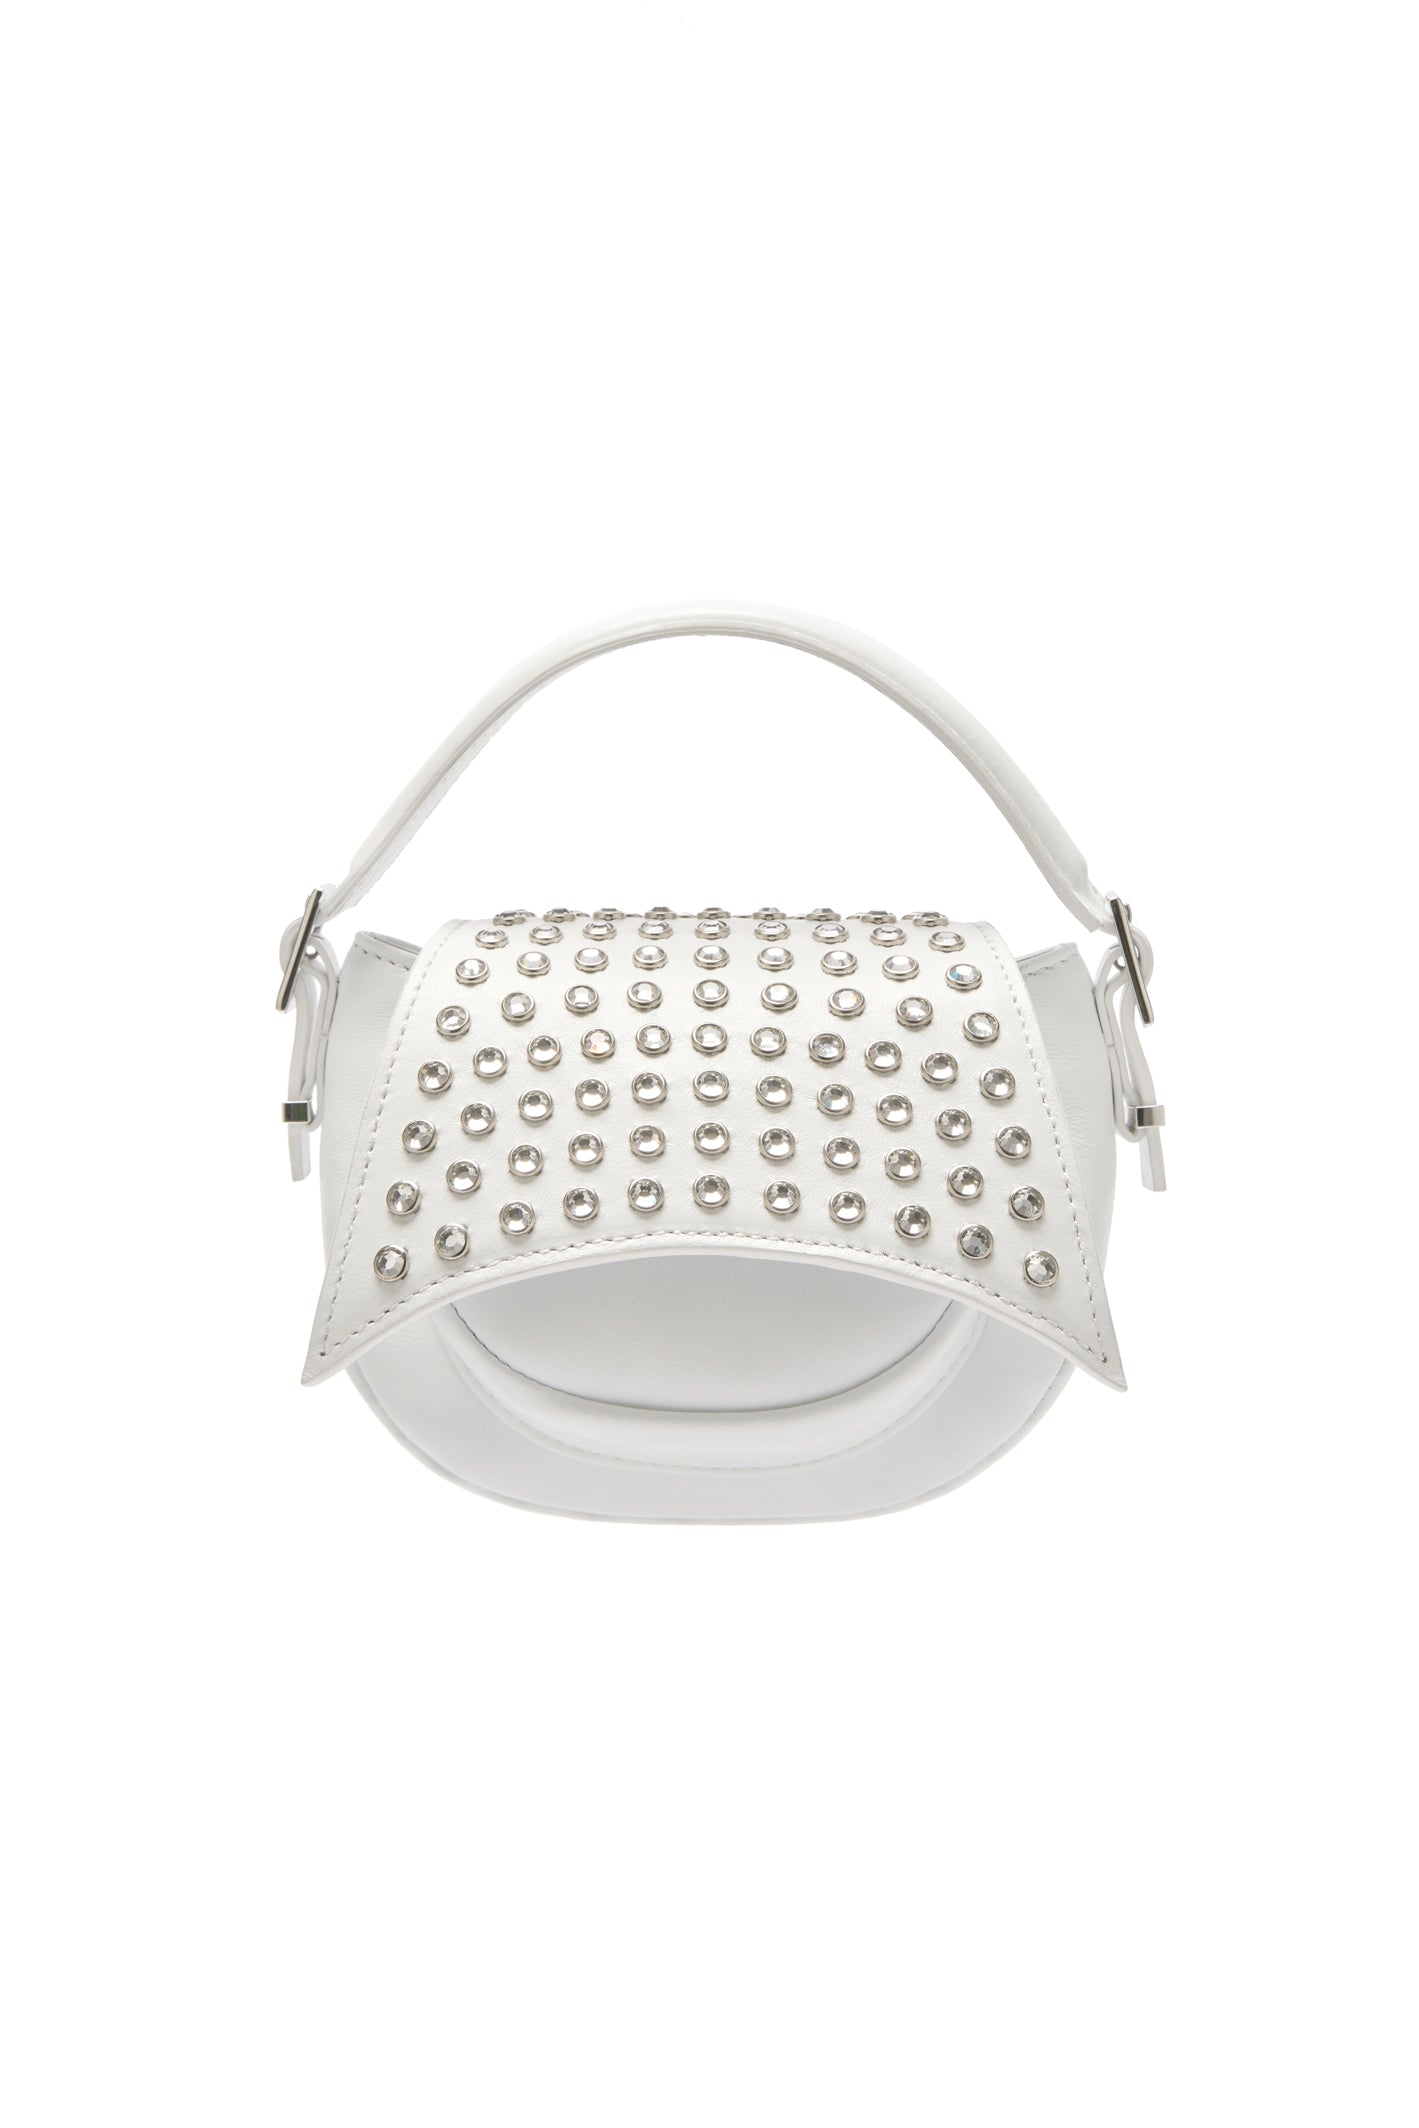 KIKS STUDDED LEATHER BAG IN WHITE WITH CRYSTALS – 16Arlington